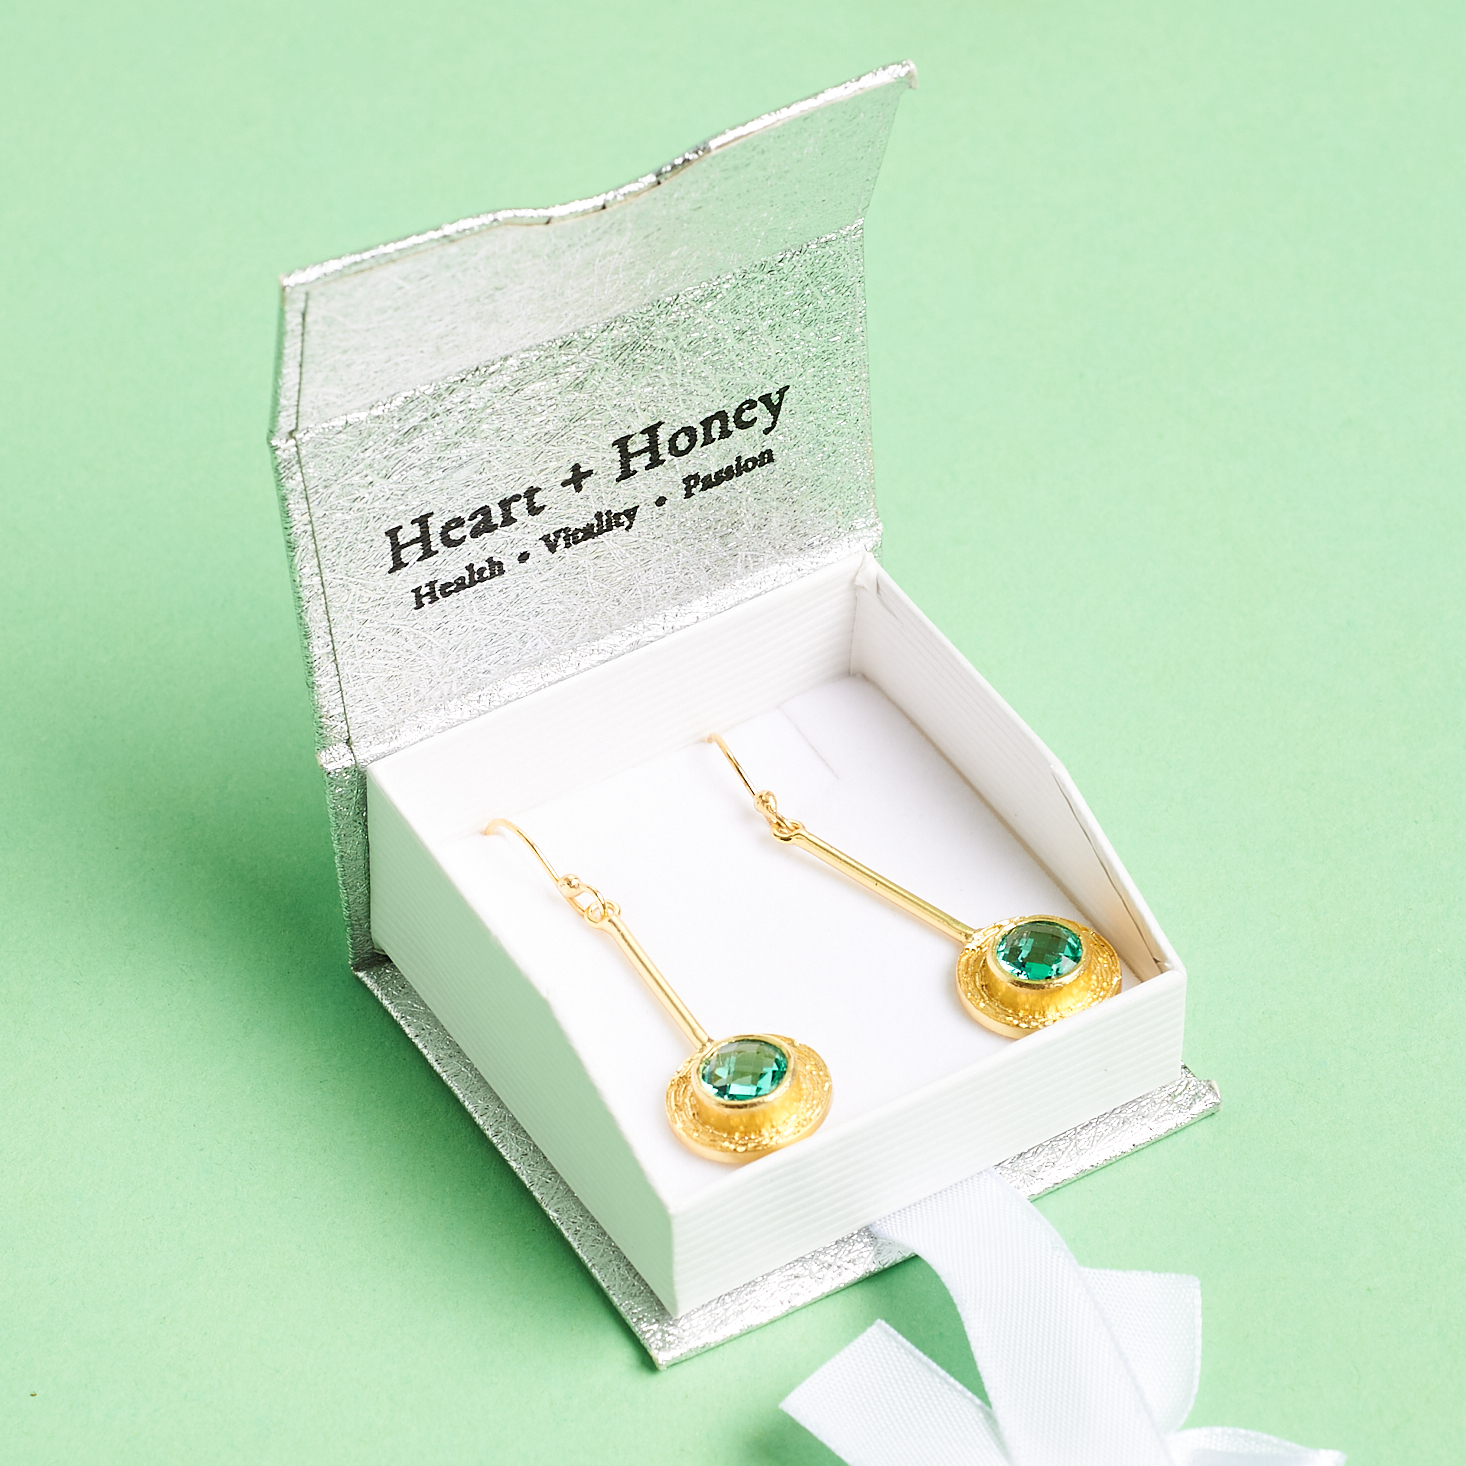 open box showing gold and green earrings inside